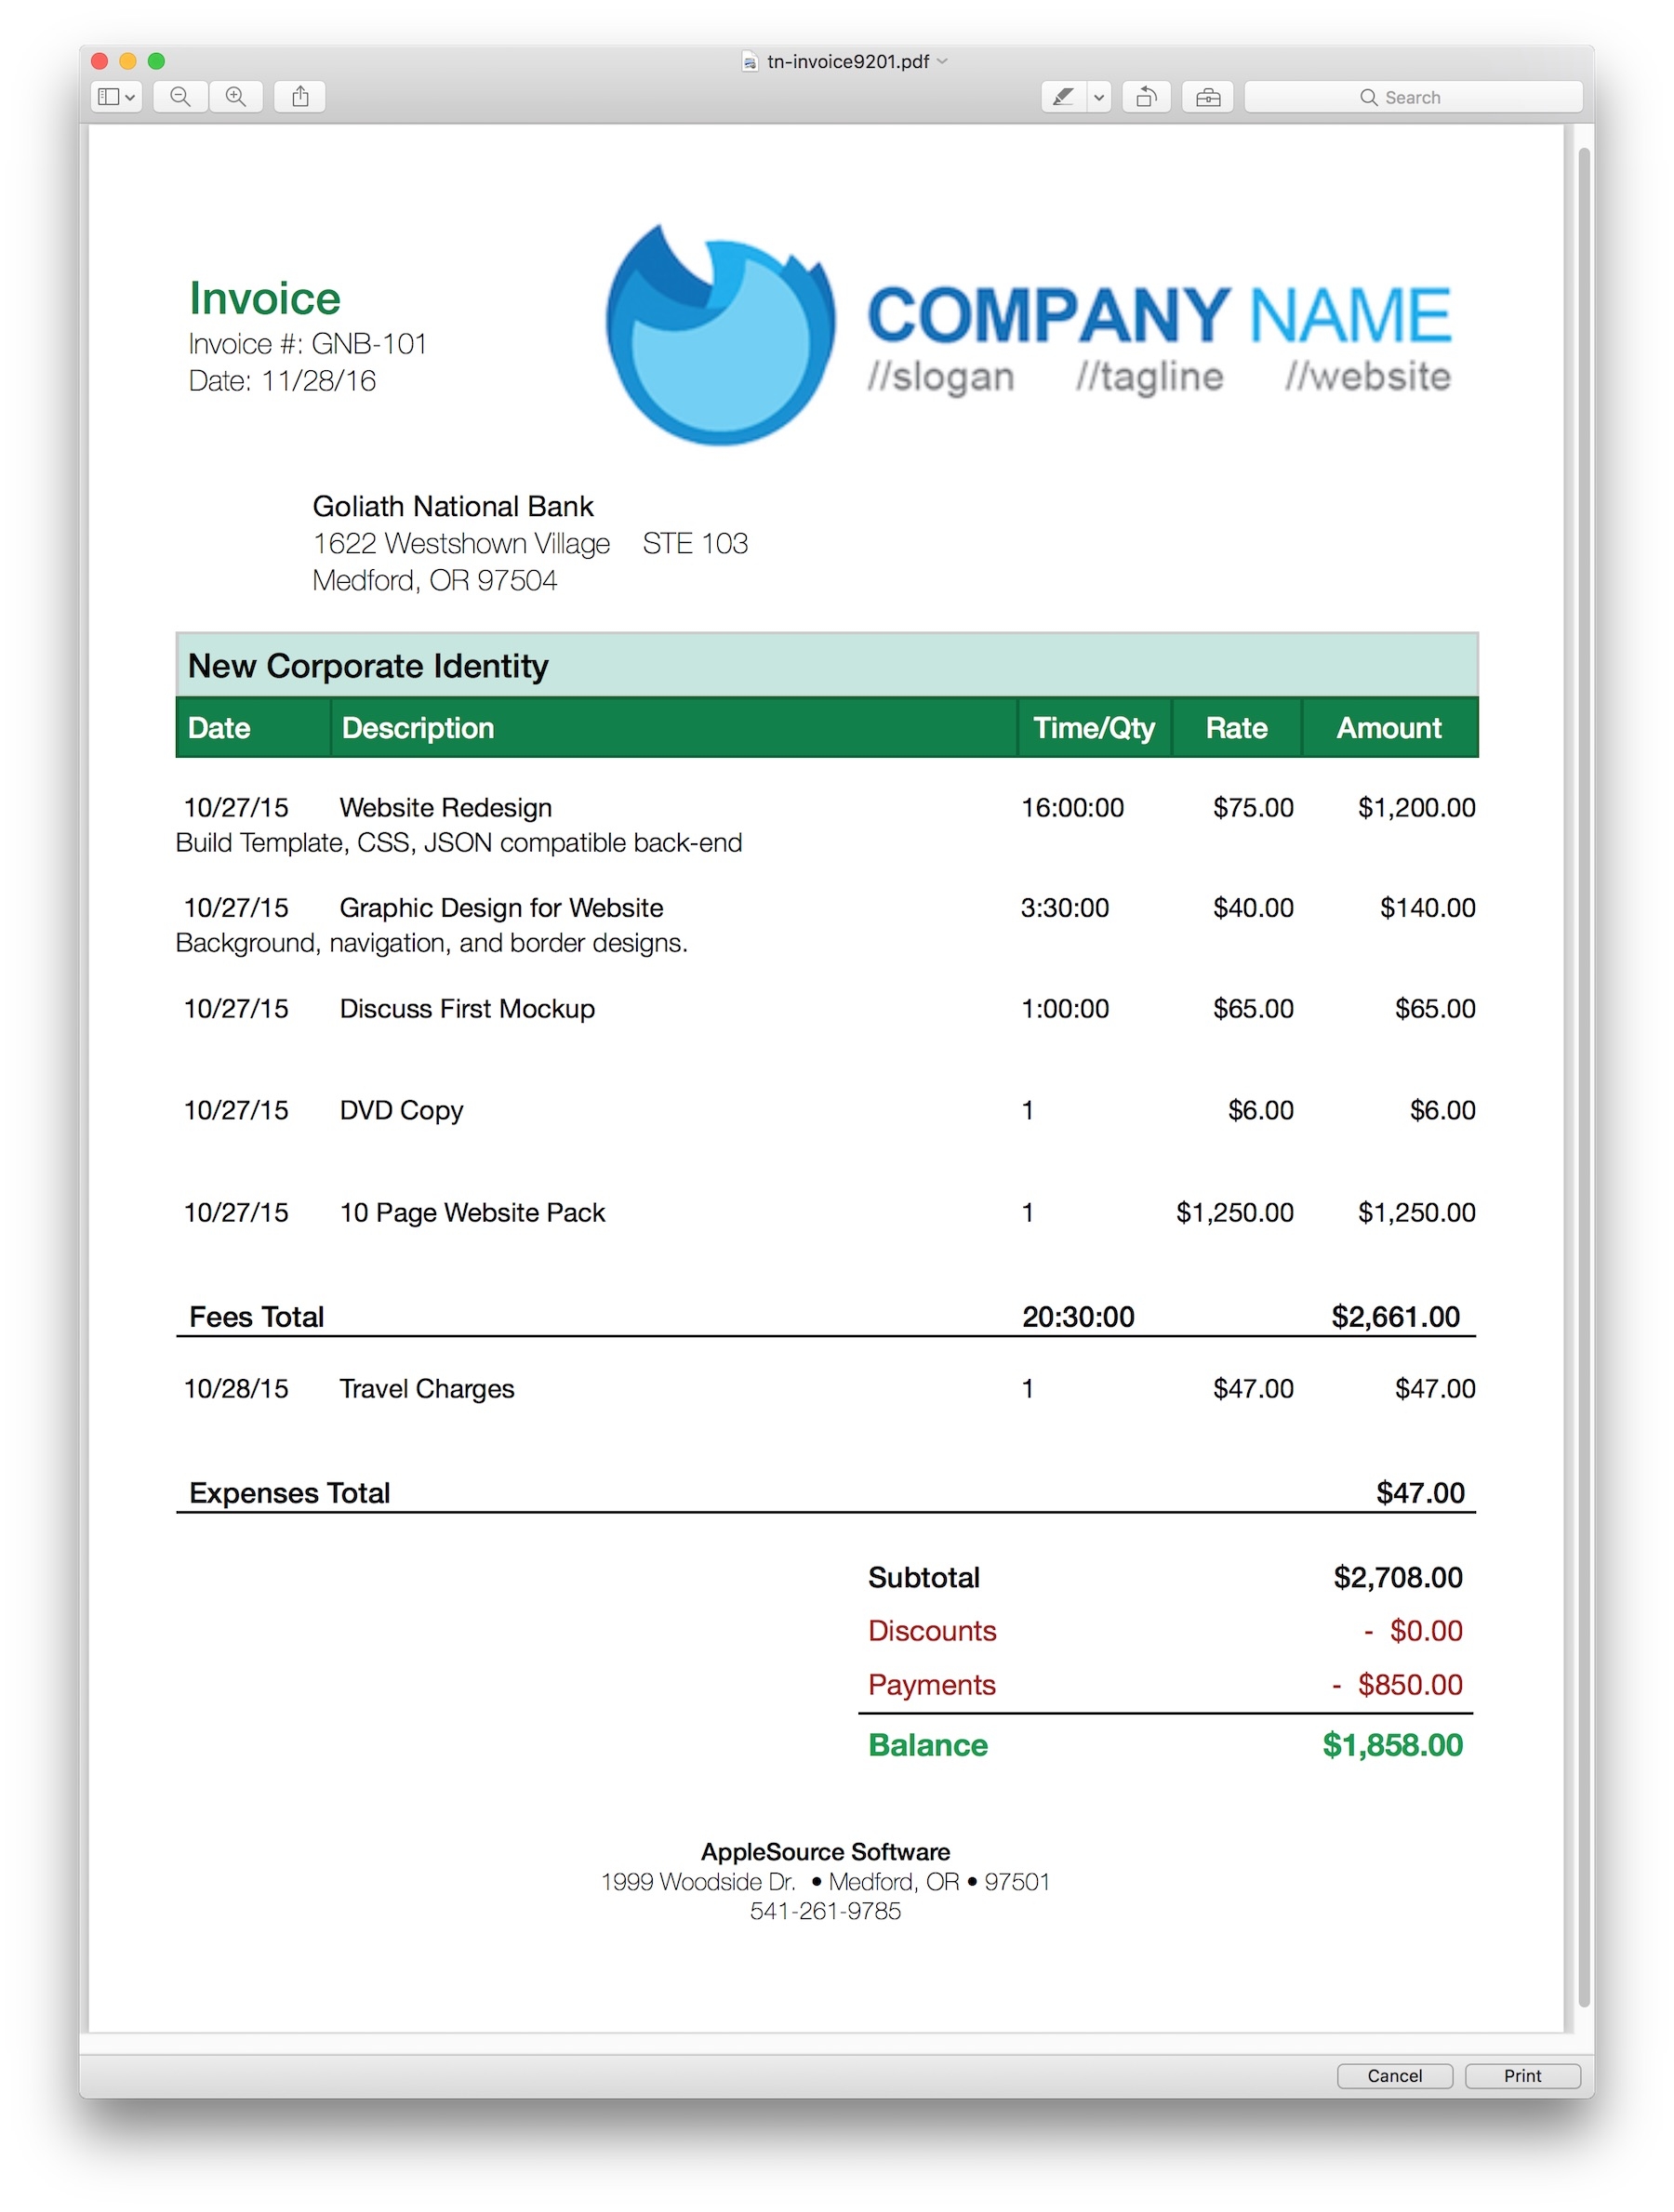 applesource software timenet invoice templates time tracking html invoice templates